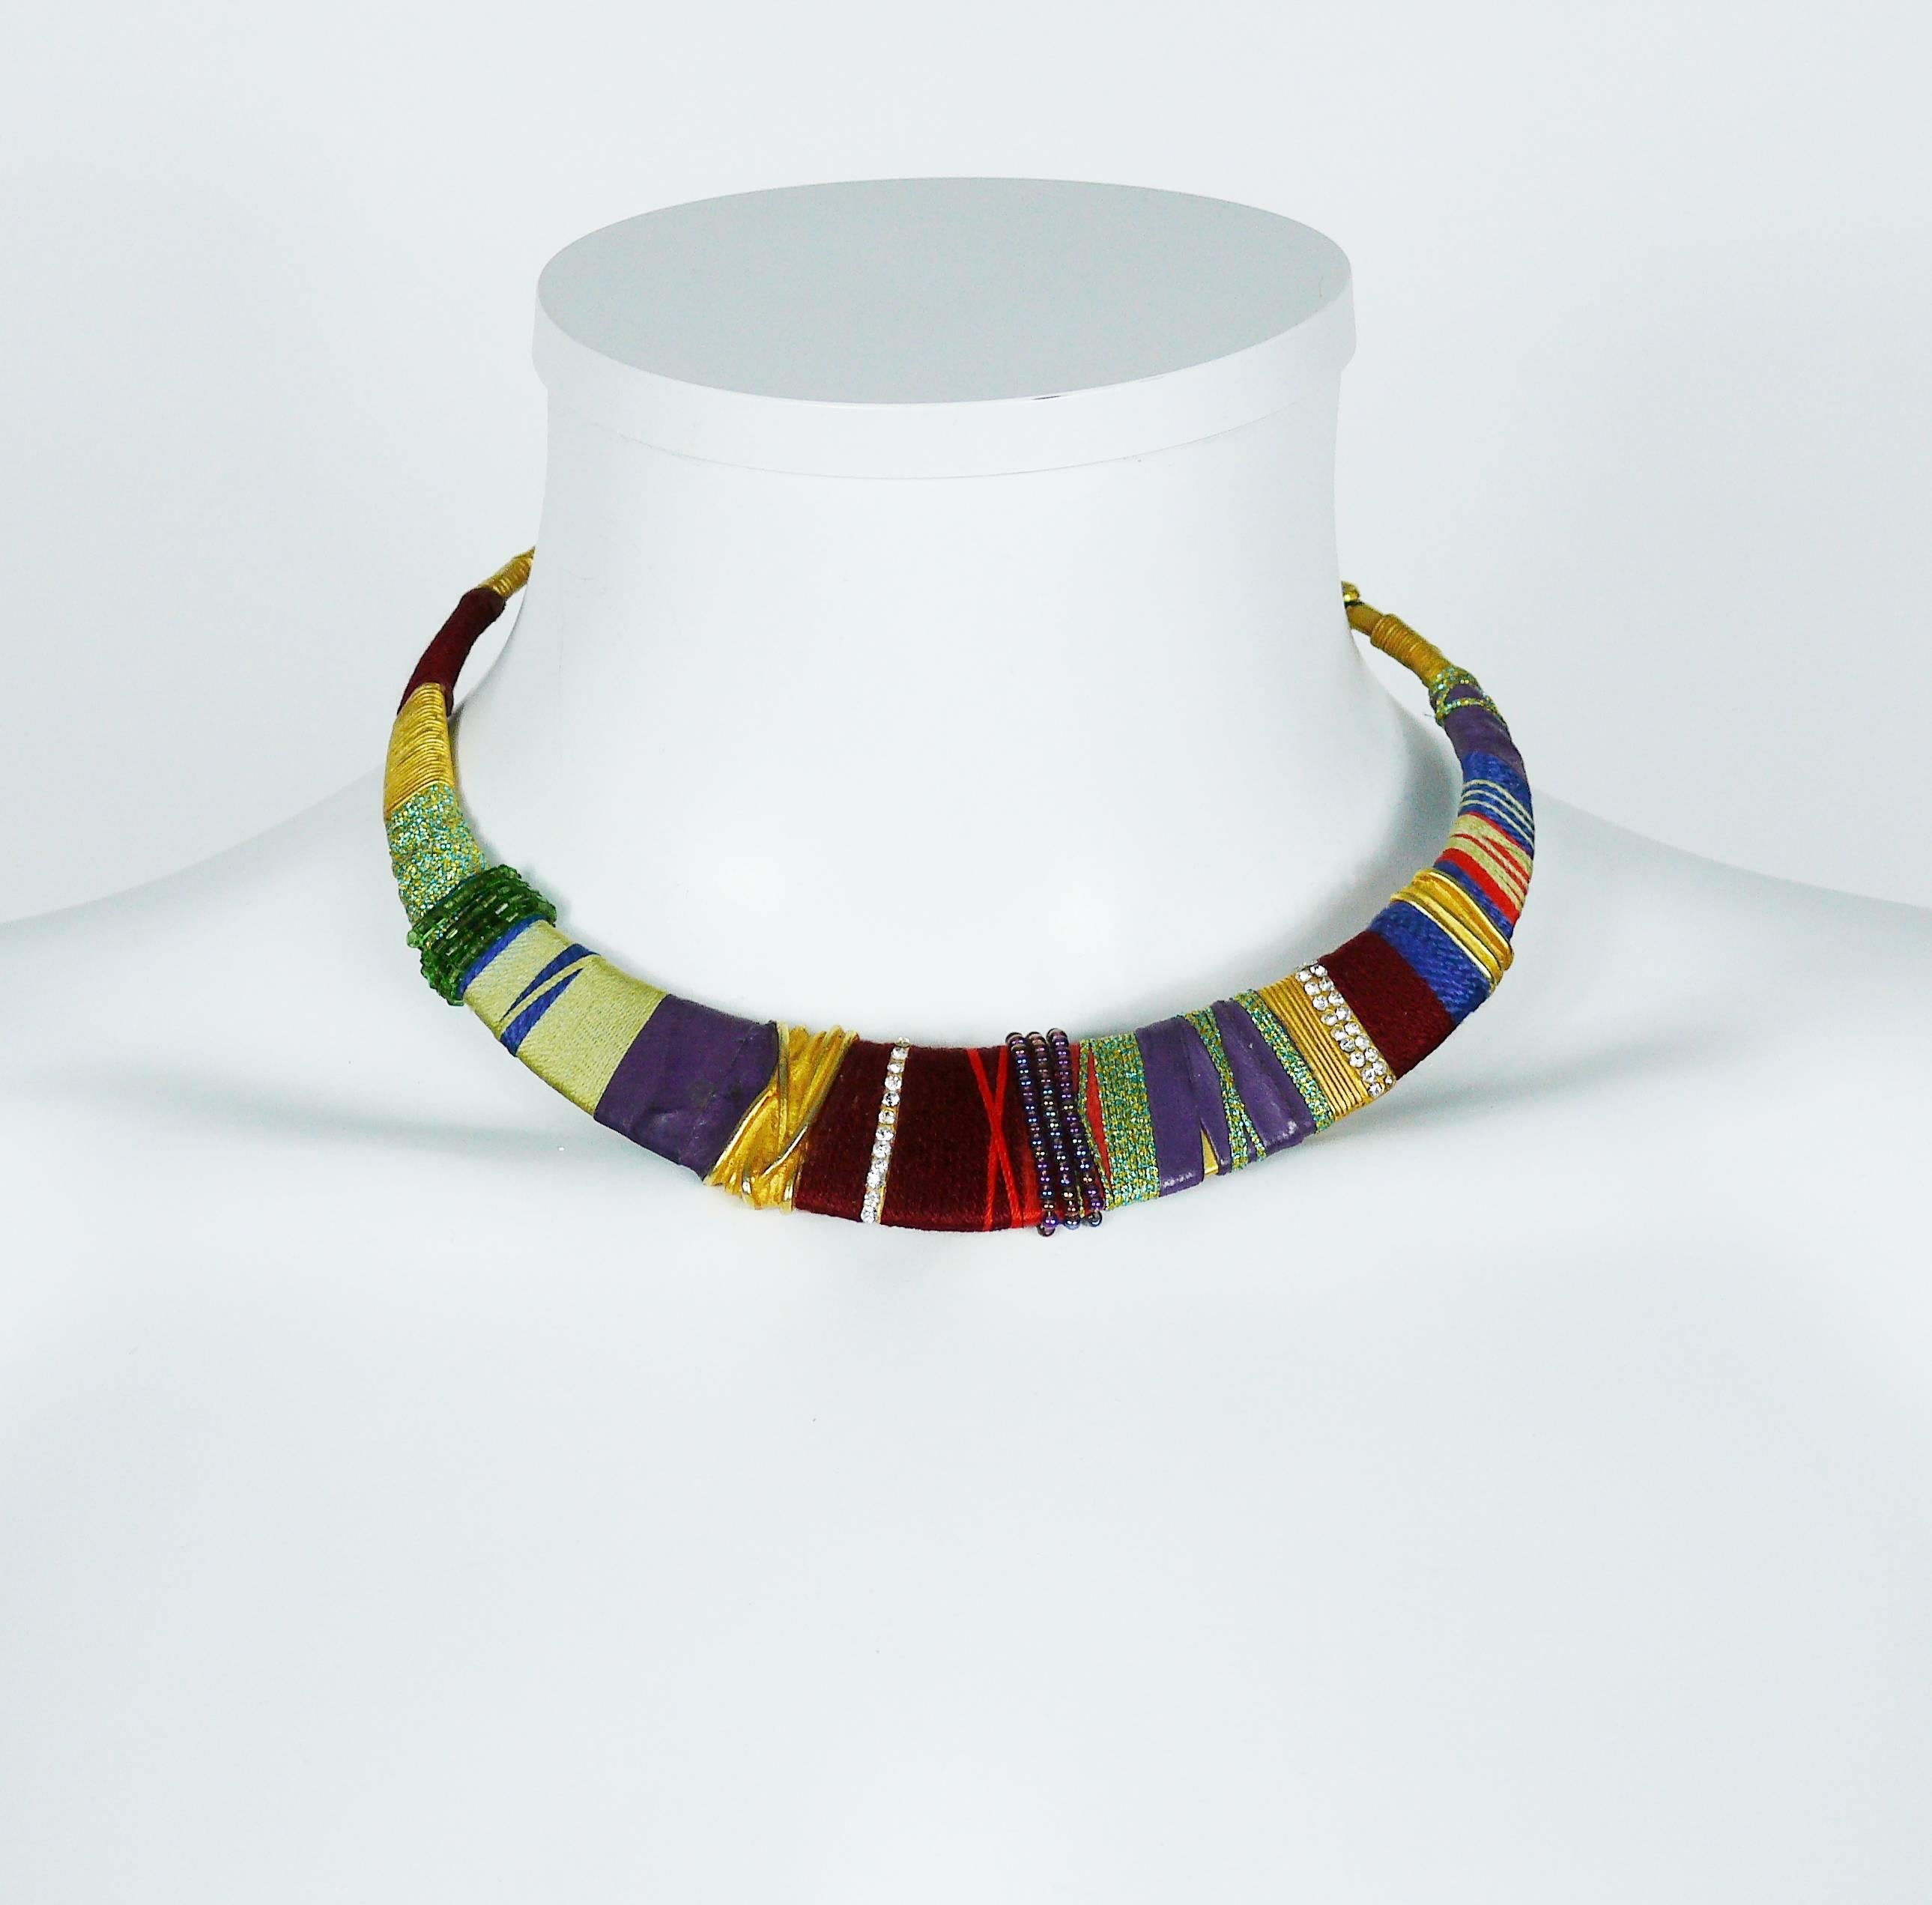 CHRISTIAN LACROIX vintage Masai inspired gold tone rigid choker necklace embellished with multicolored pearls, fabrics, purple leather and clear crystals.

Hook clasp.

Marked CHRISTIAN LACROIX CL Made in France.

Indicative measurements :